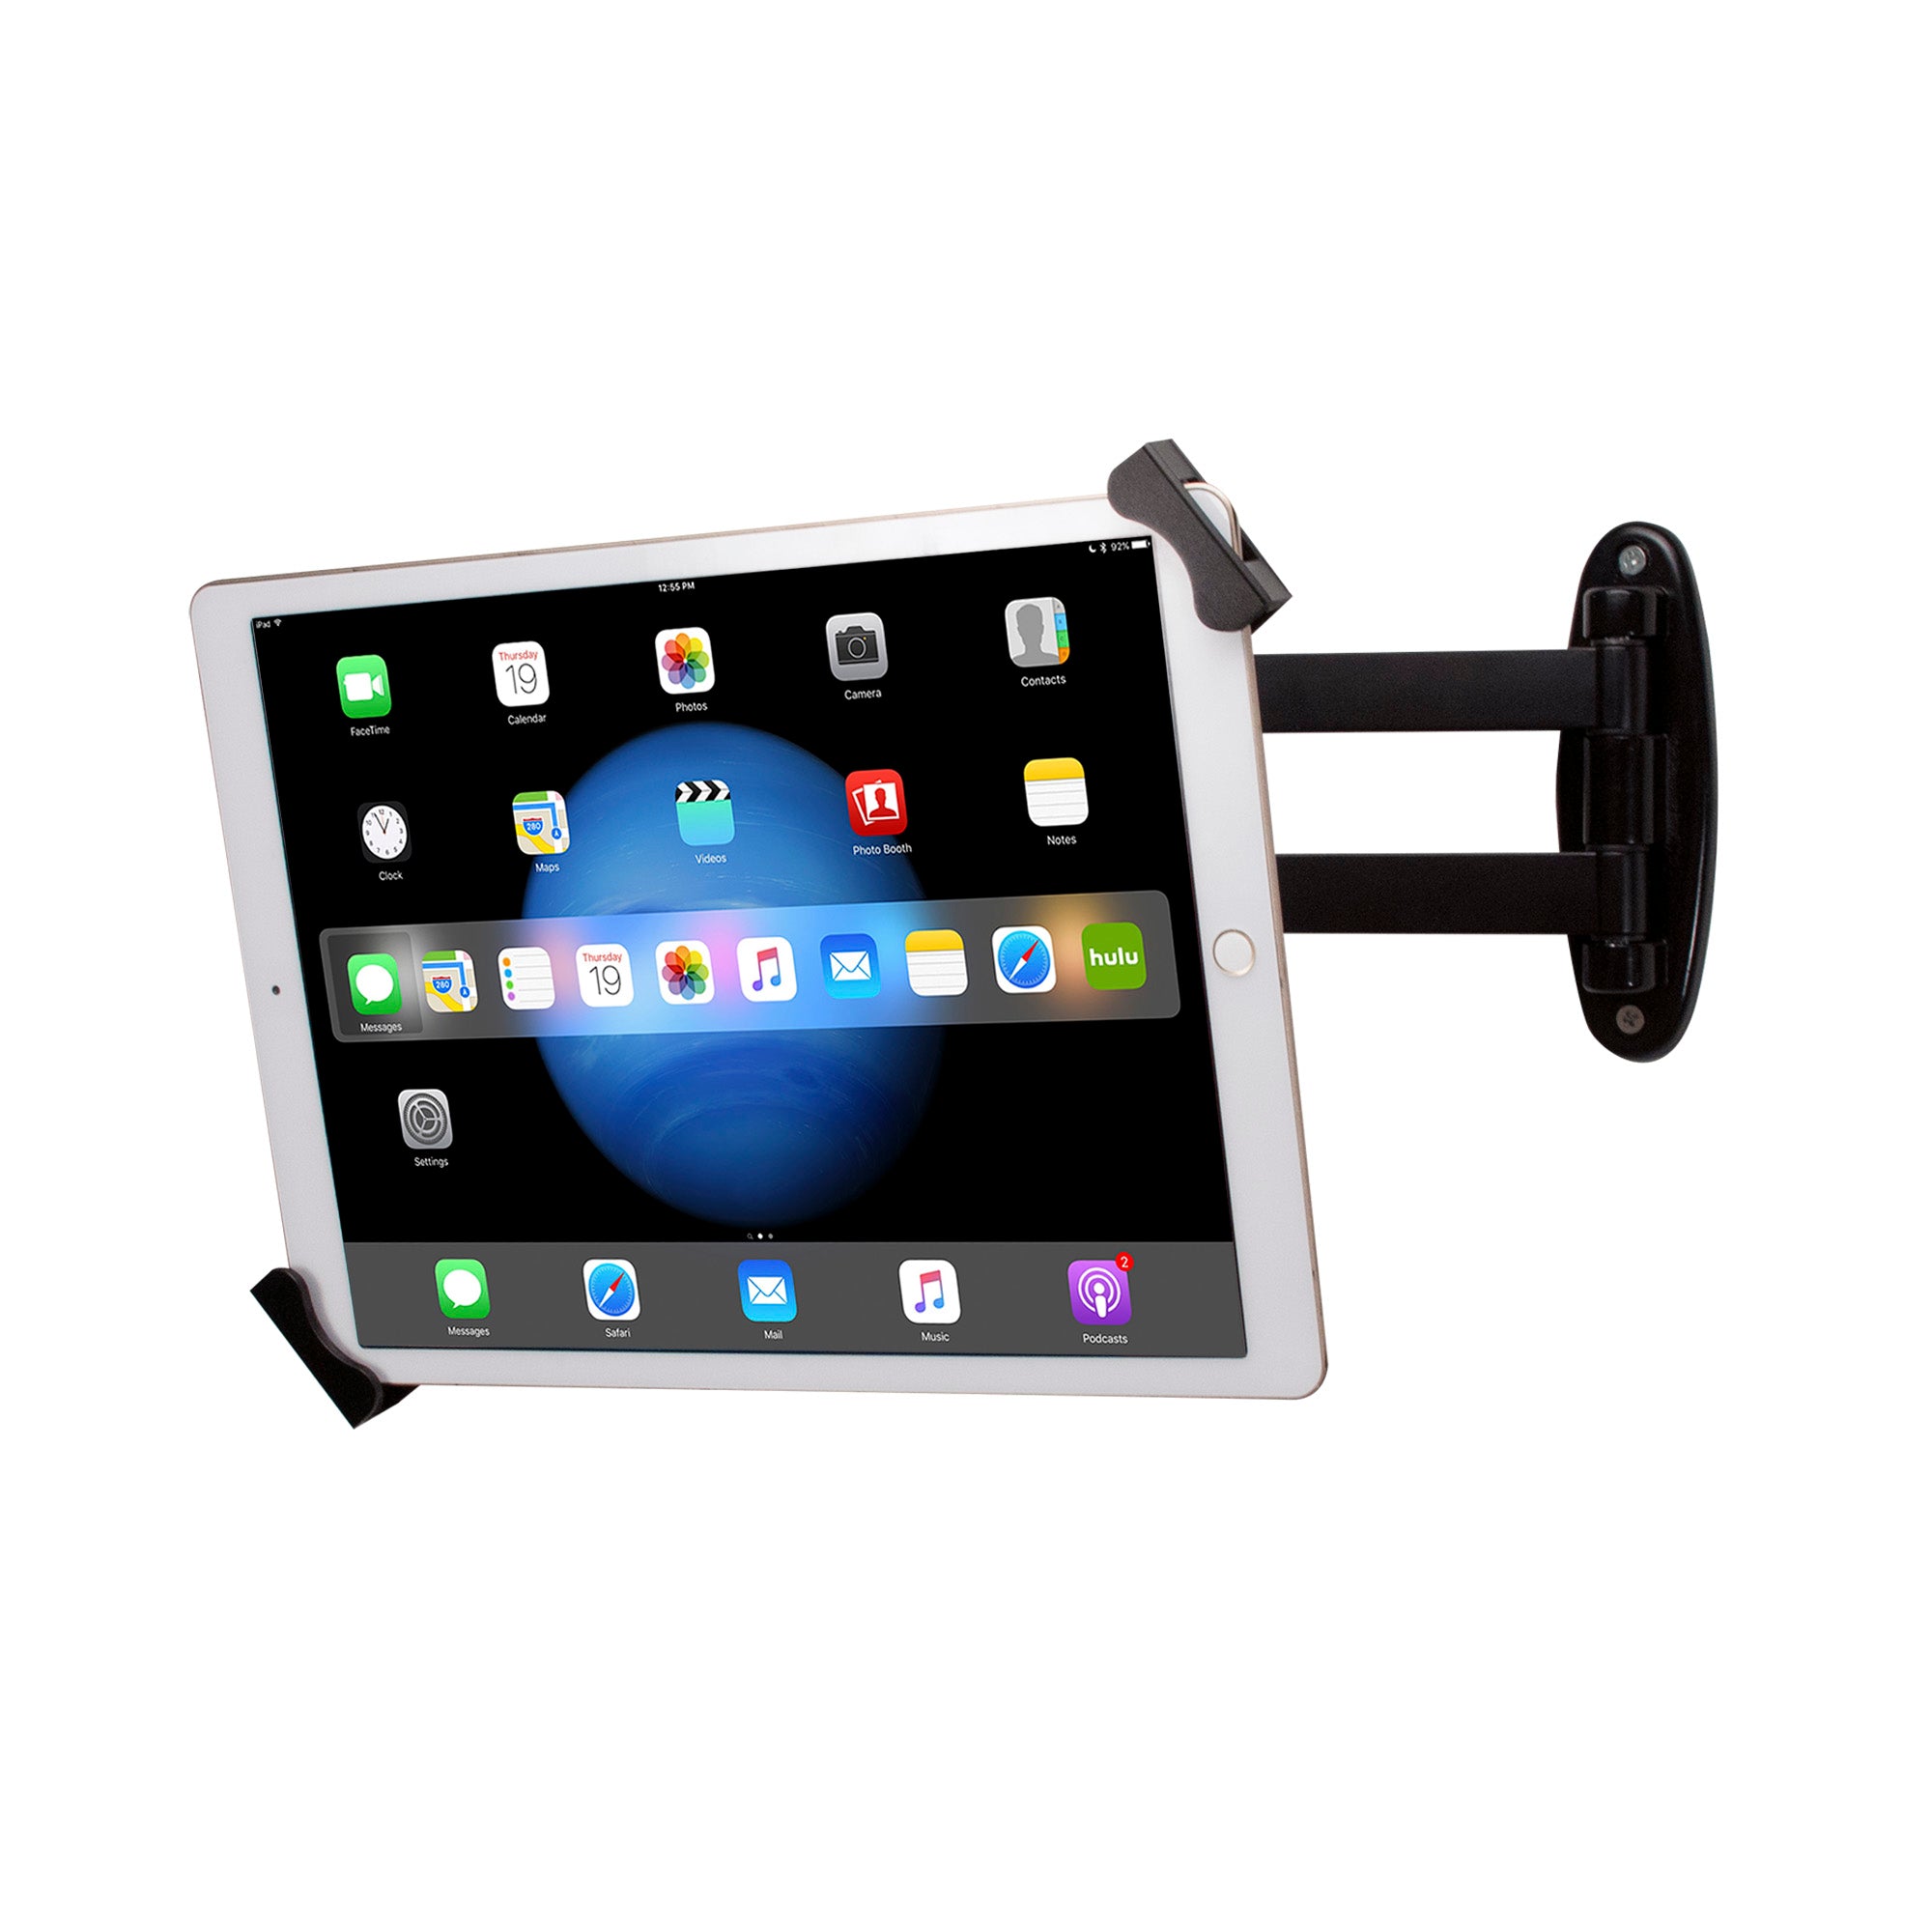 Articulating Security Wall Mount for 7-13 Inch Tablets, including iPad 10.2-inch (7th/ 8th/ 9th Generation)